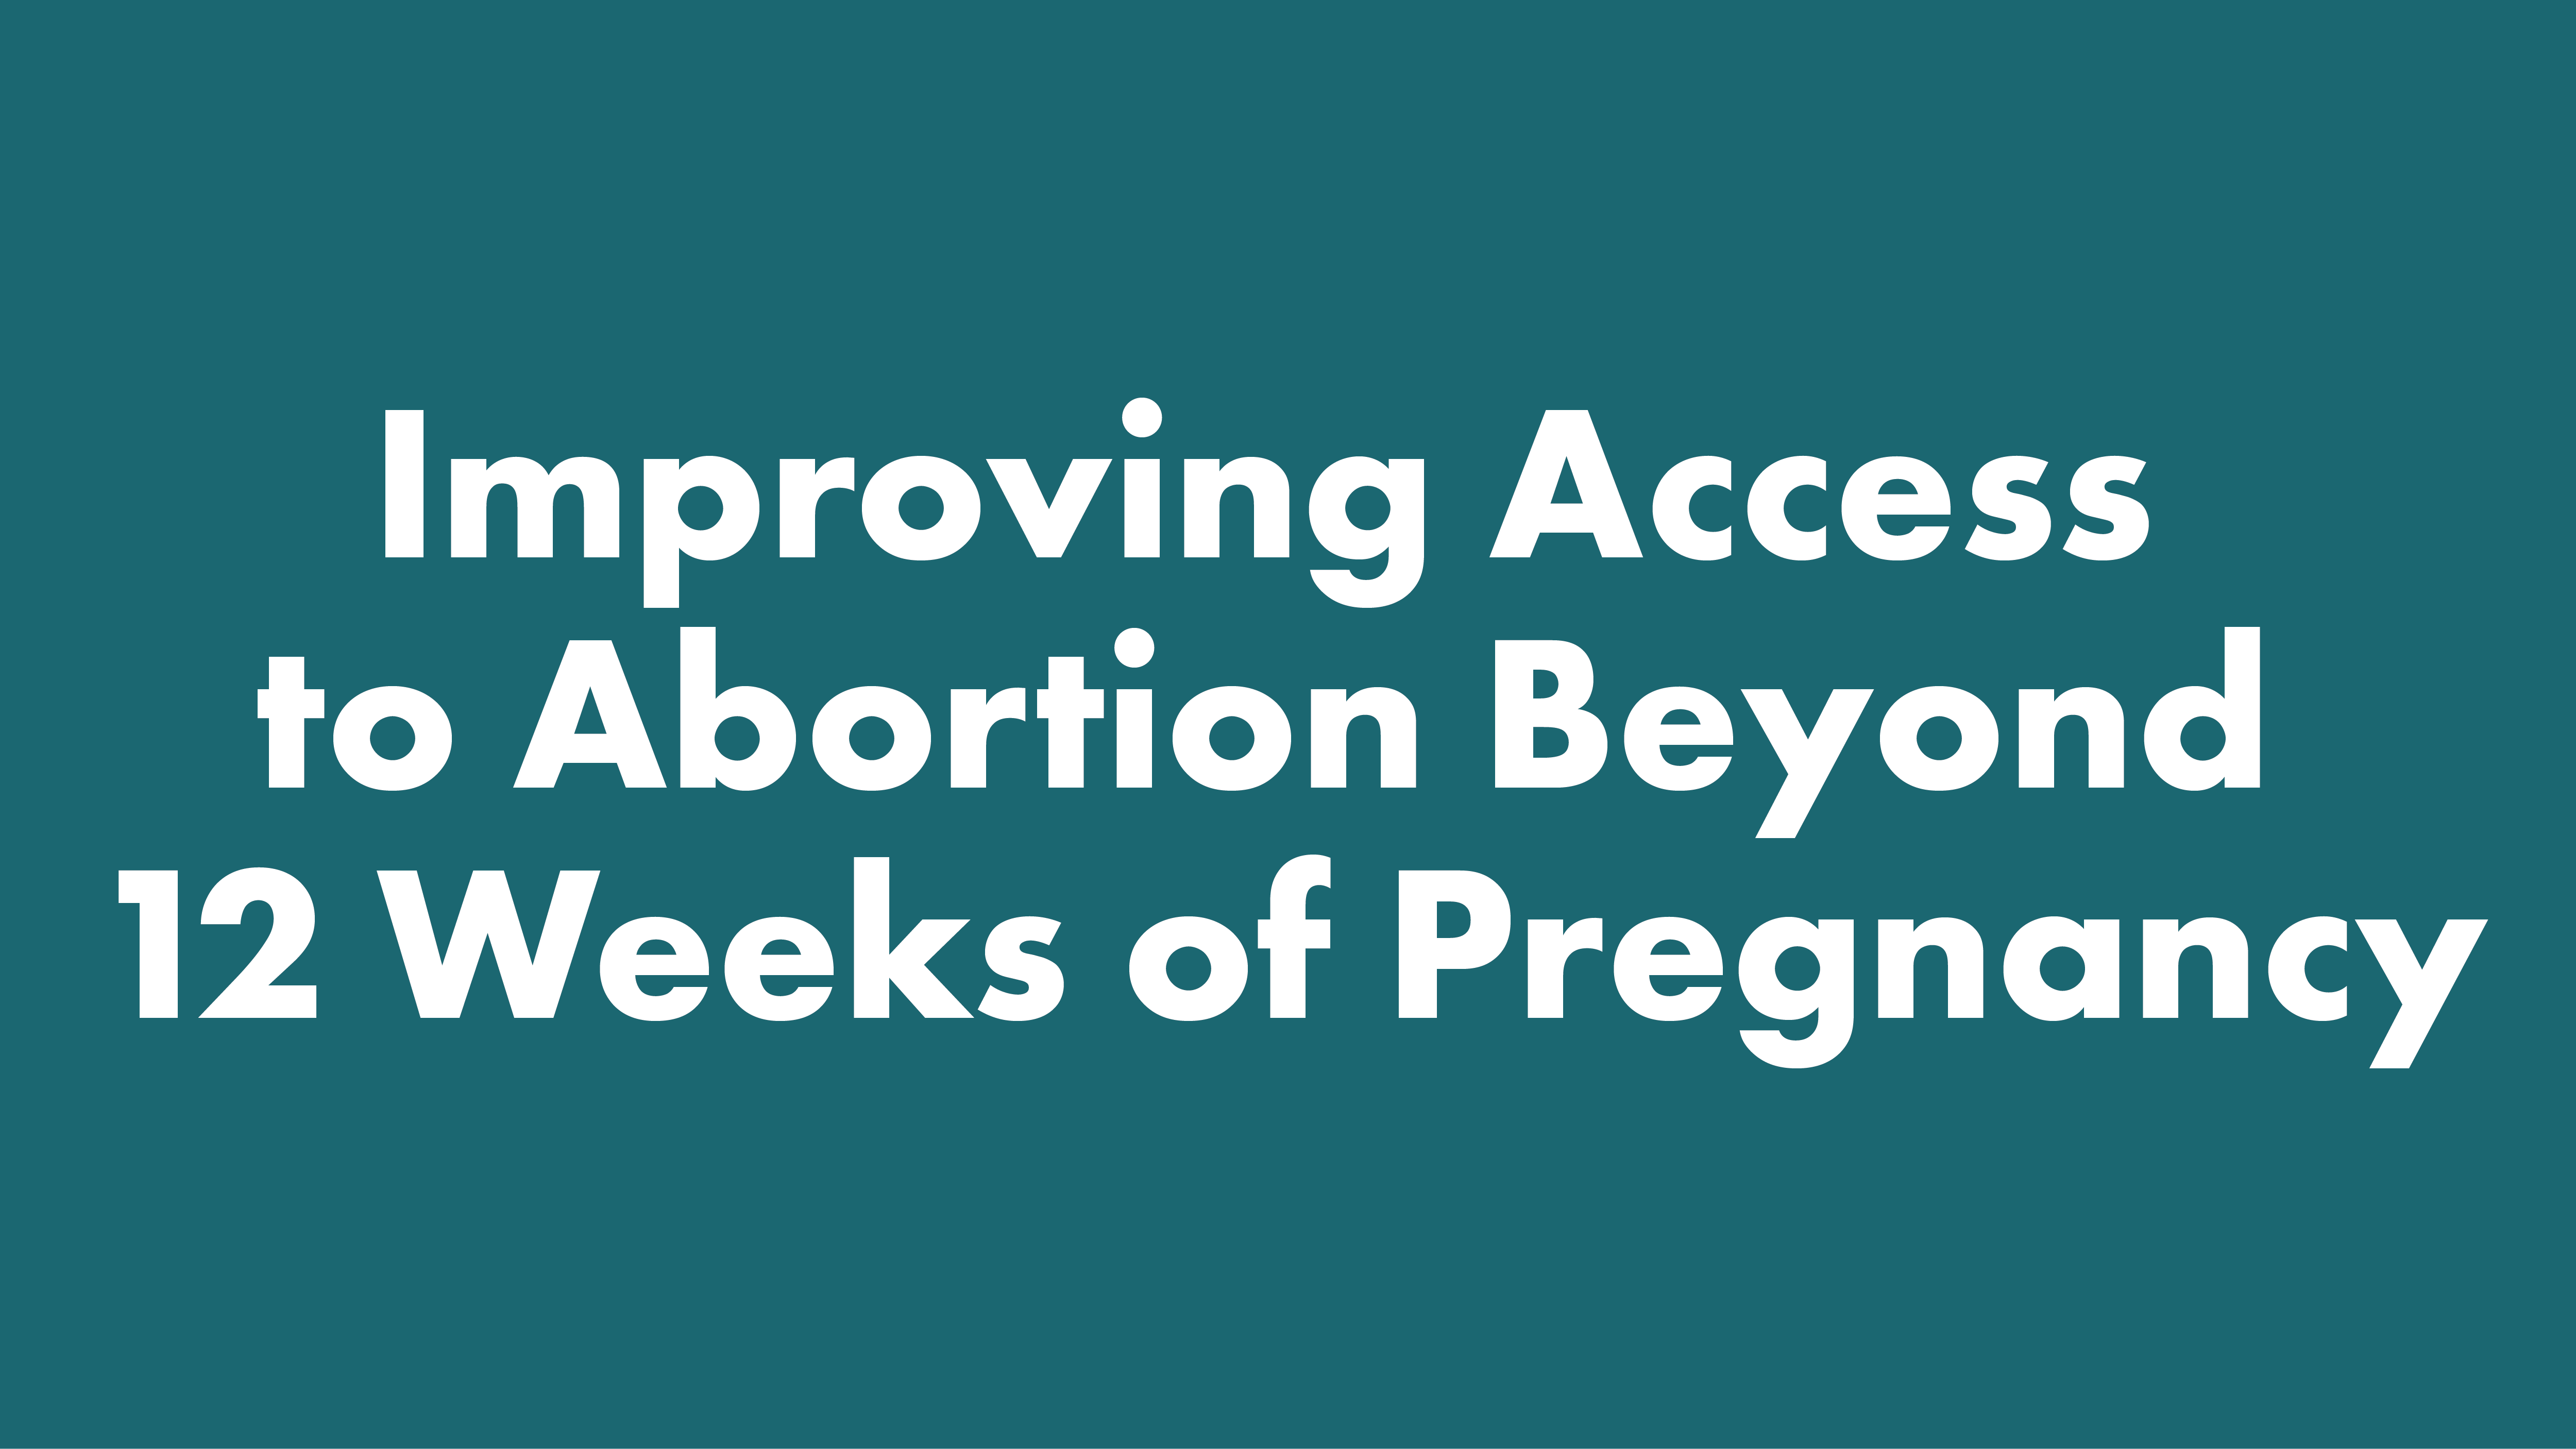 visual statement improving access to abortion beyond 12 weeks of pregnancy